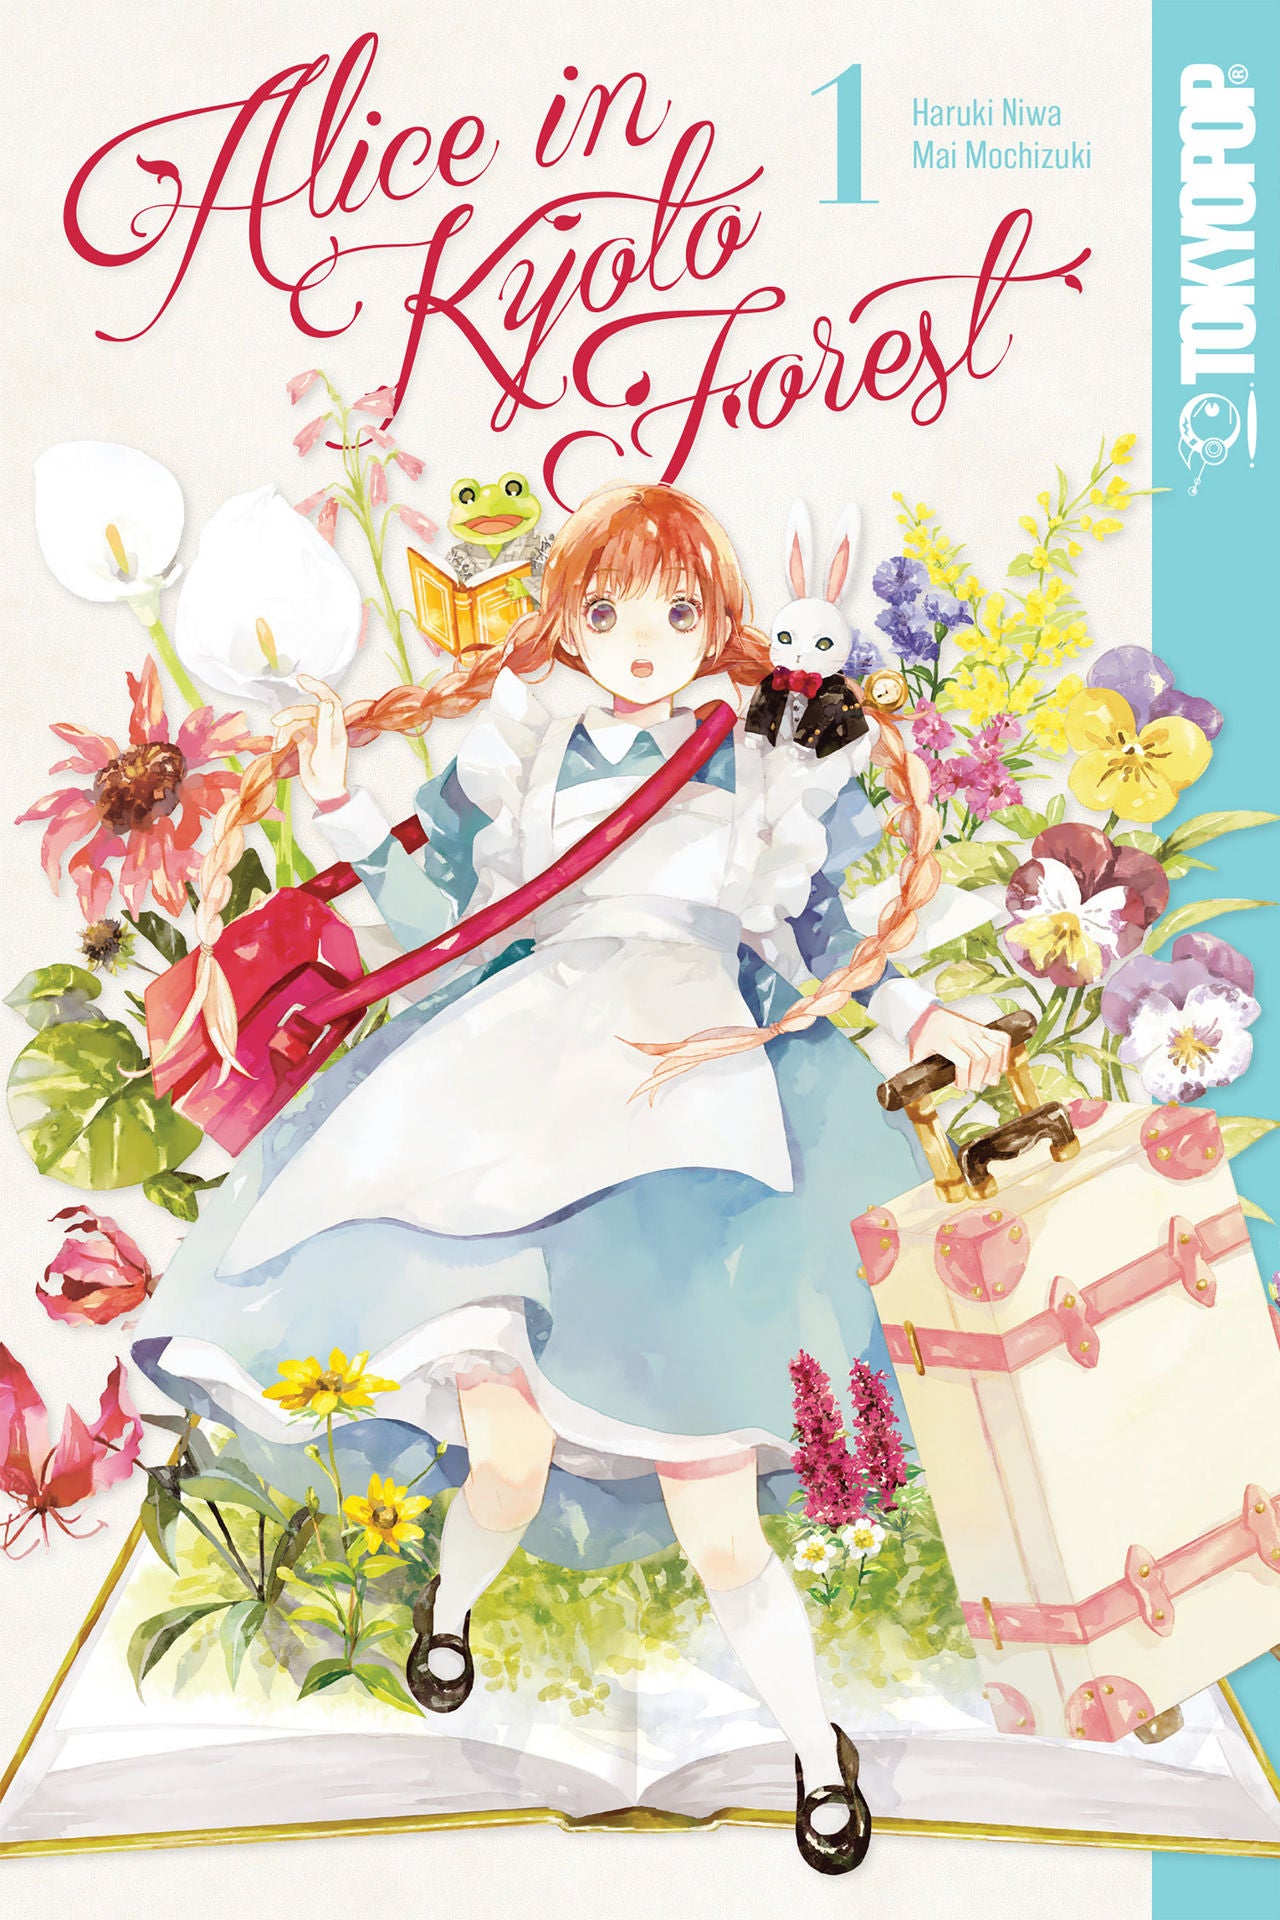 ALICE IN KYOTO FOREST VOL 1